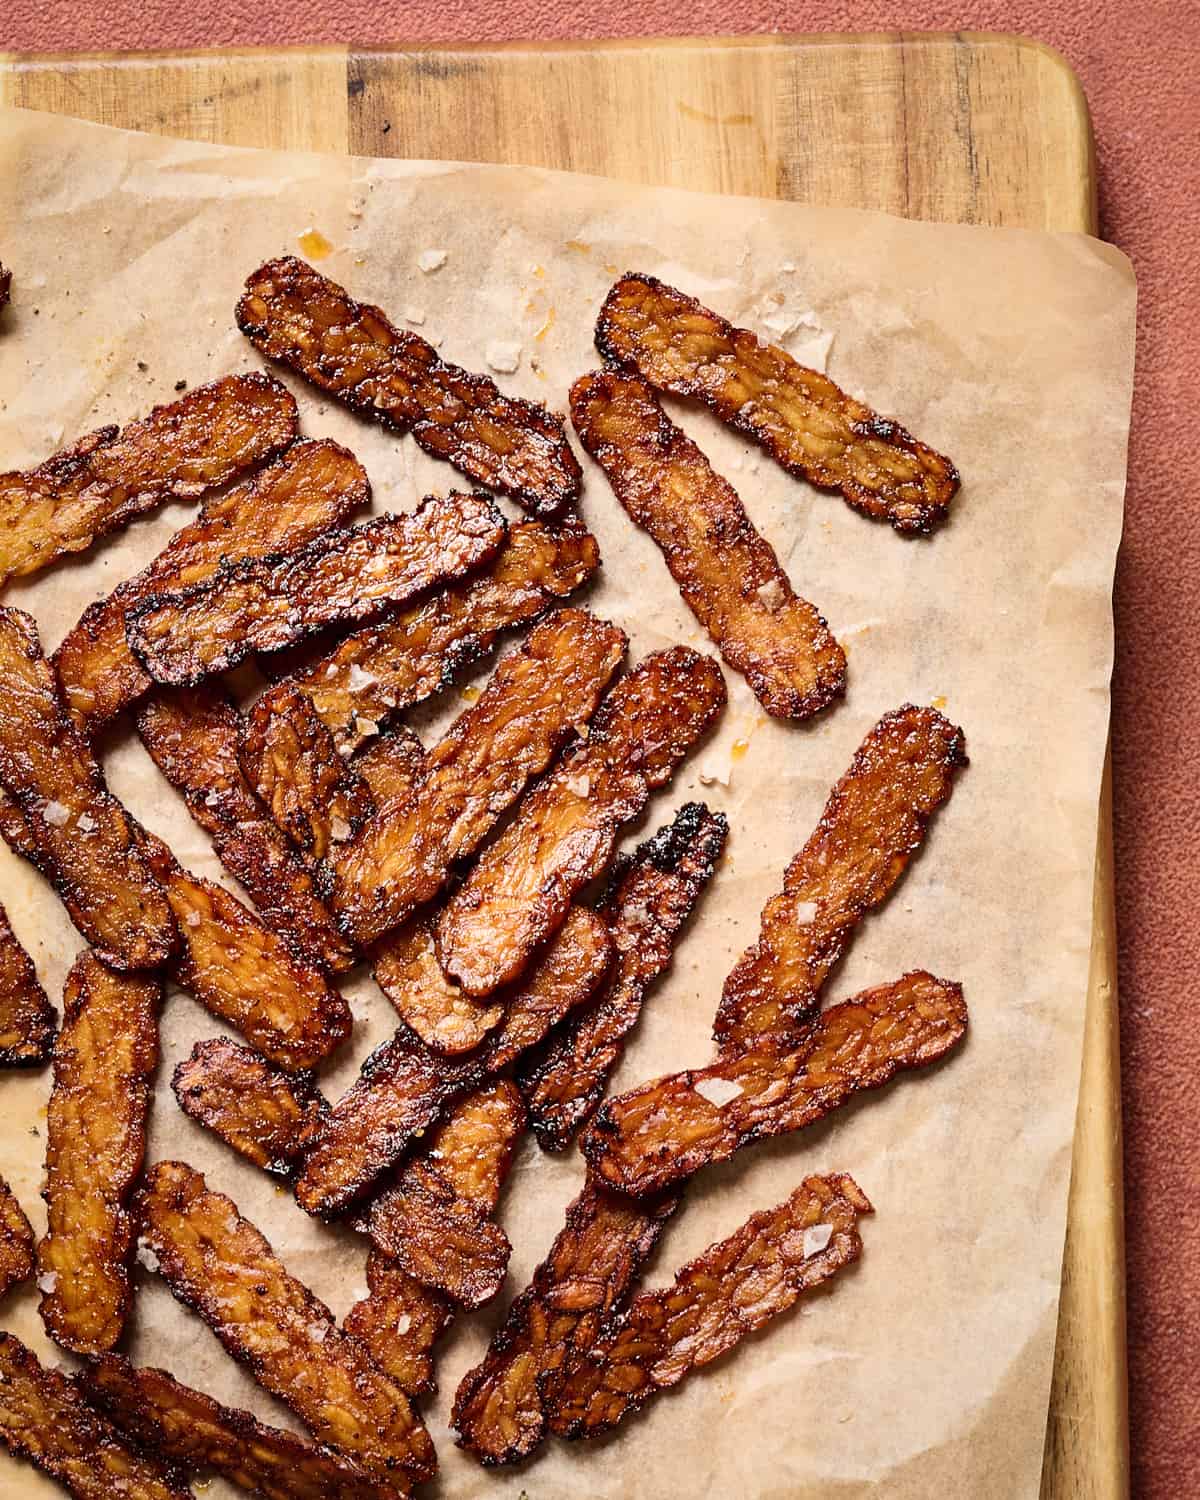 Crispy browned tempeh bacon slices on a piece of parchment paper on a wooden cutting board.